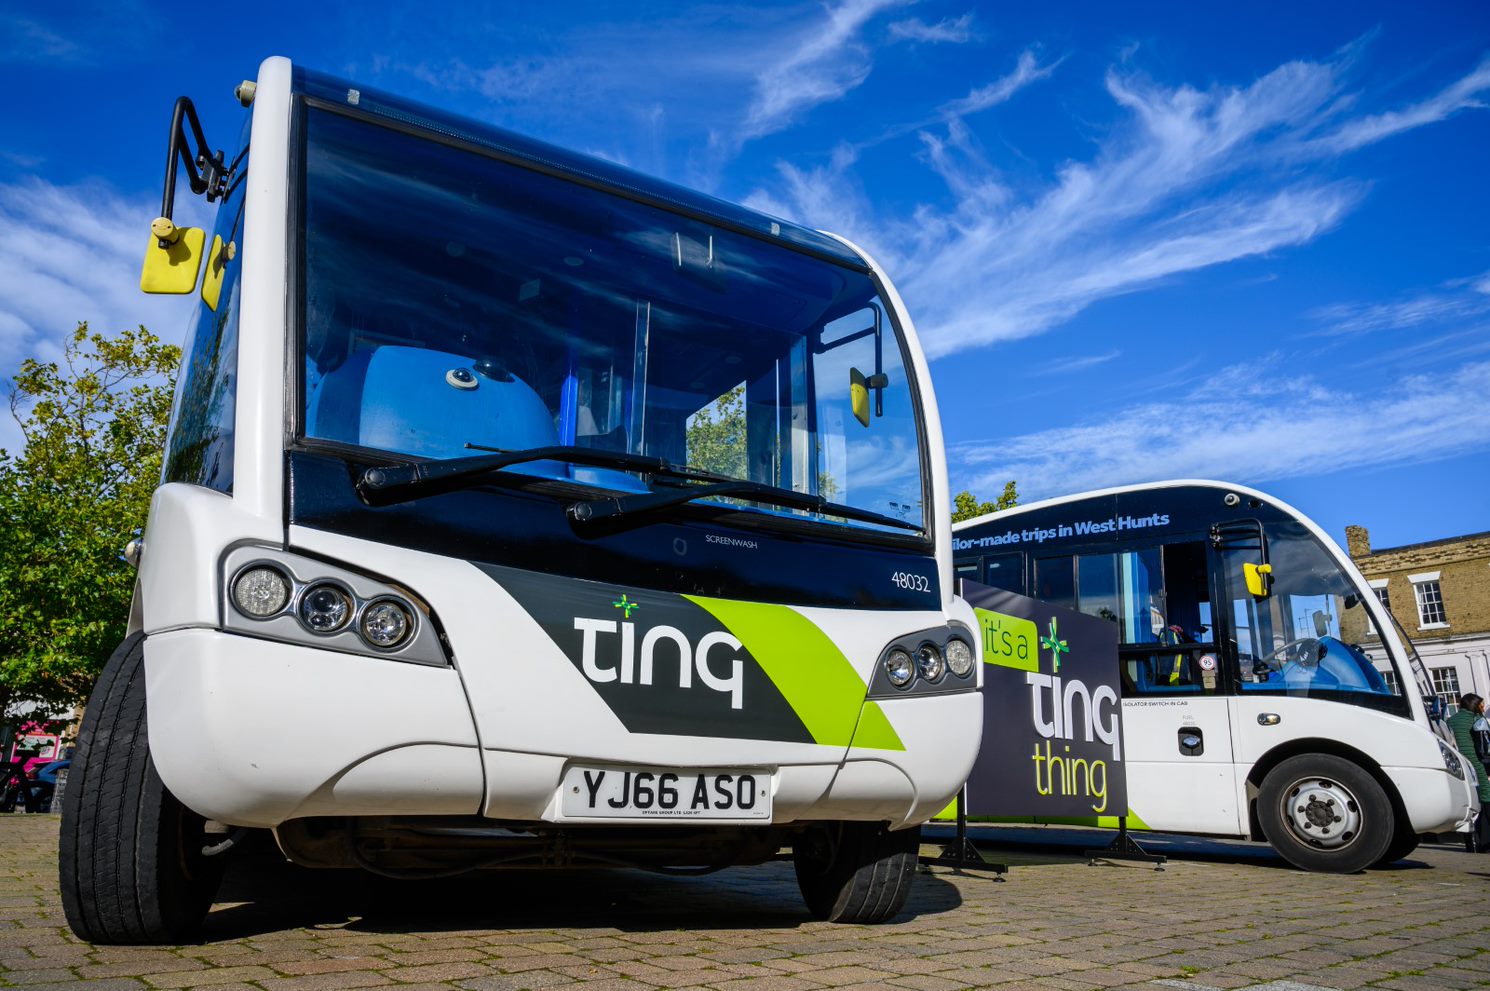 Vectare to take over Stagecoach’s Ting service